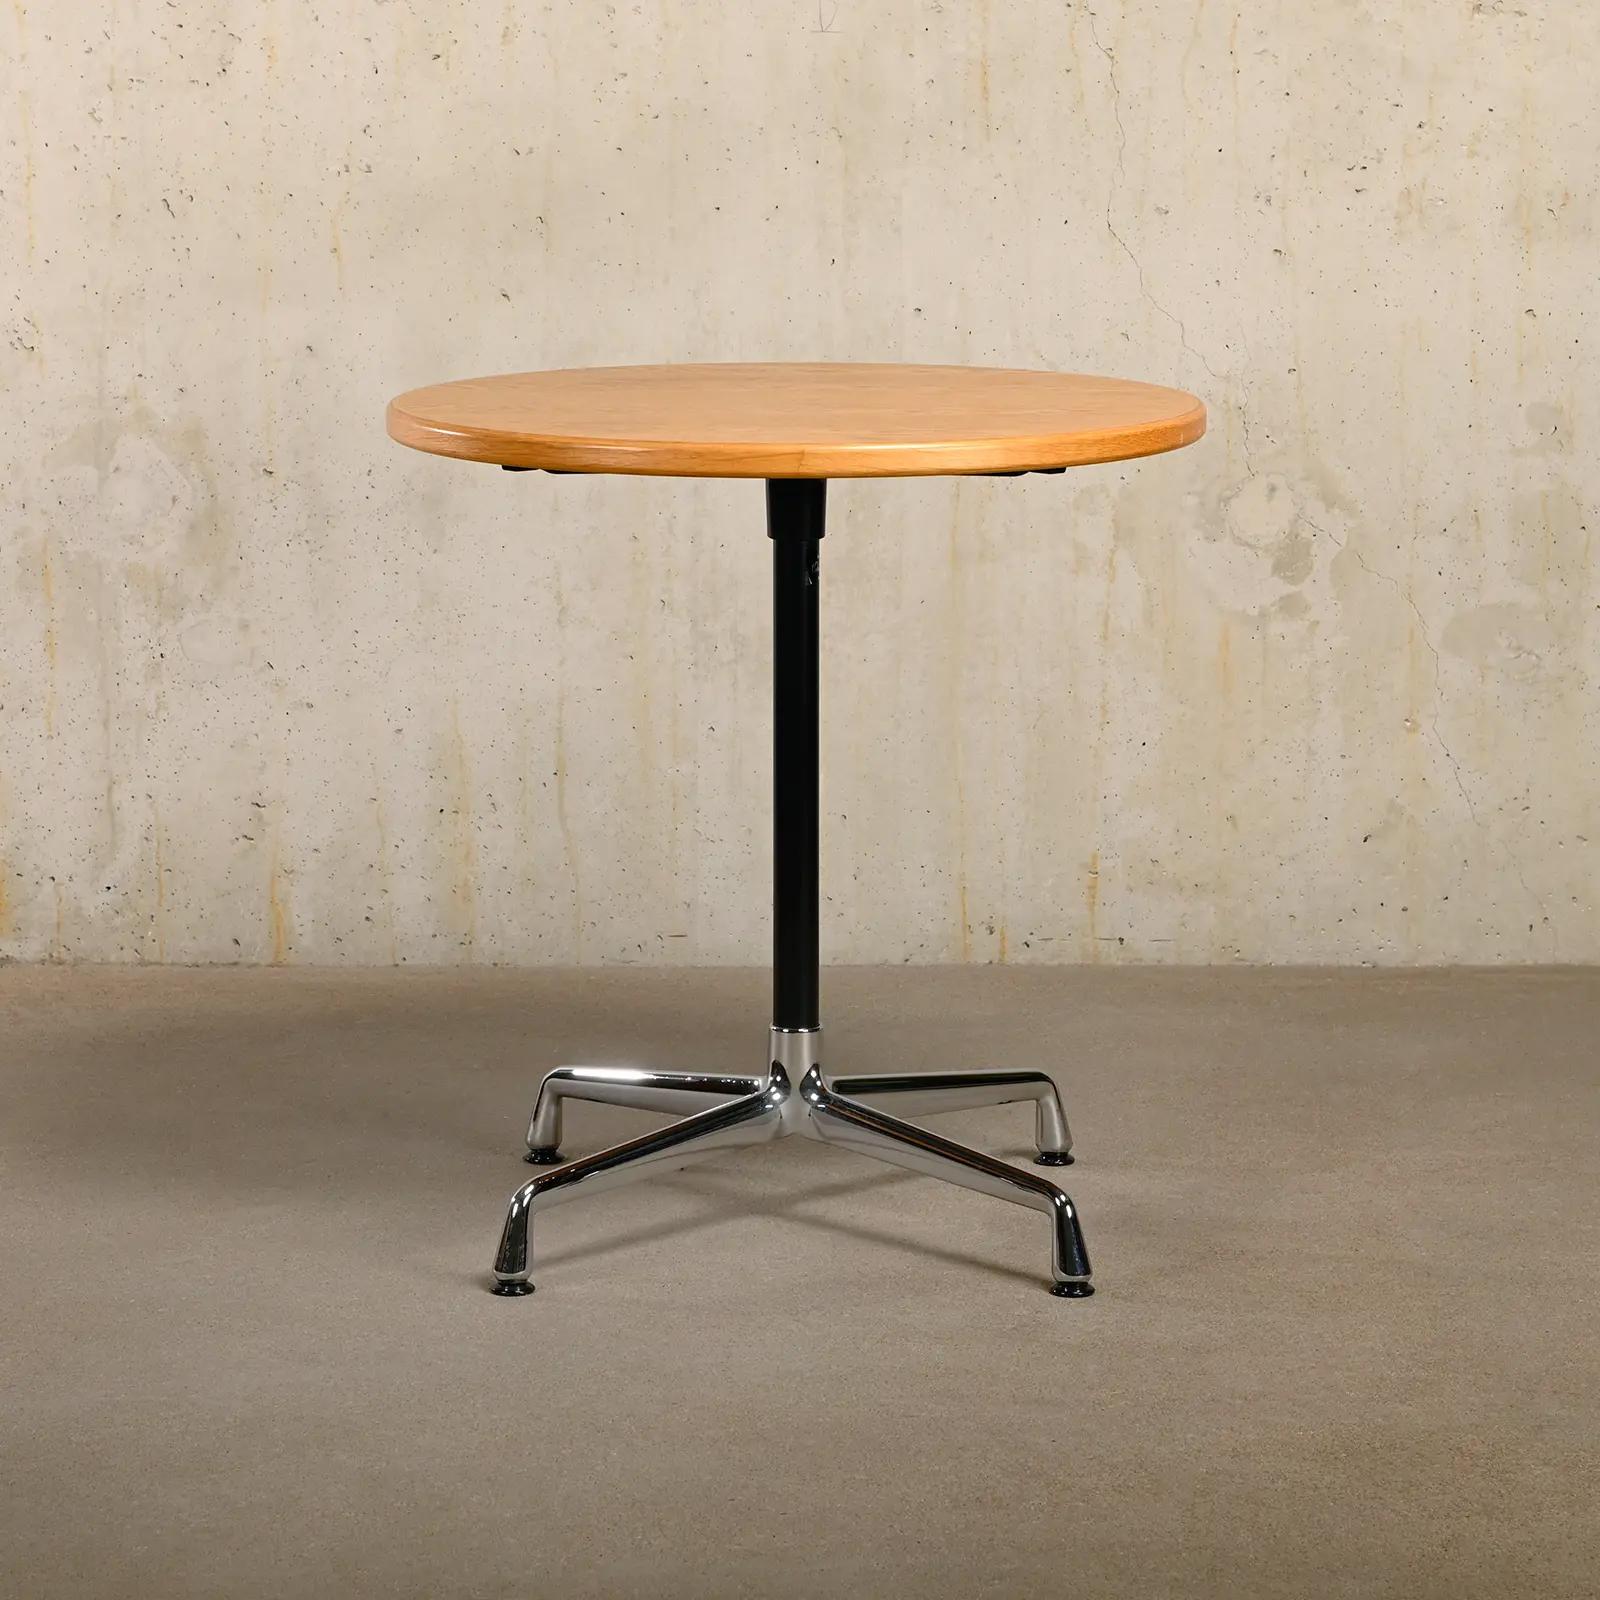 Elegant small dining or bistro table by Charles & Ray Eames for Vitra. The table has a chrome-plated aluminum base with a powder-coated stand and a table top veneered with oak and solid oak edge. Table top diameter 70 cm. Table is in very good